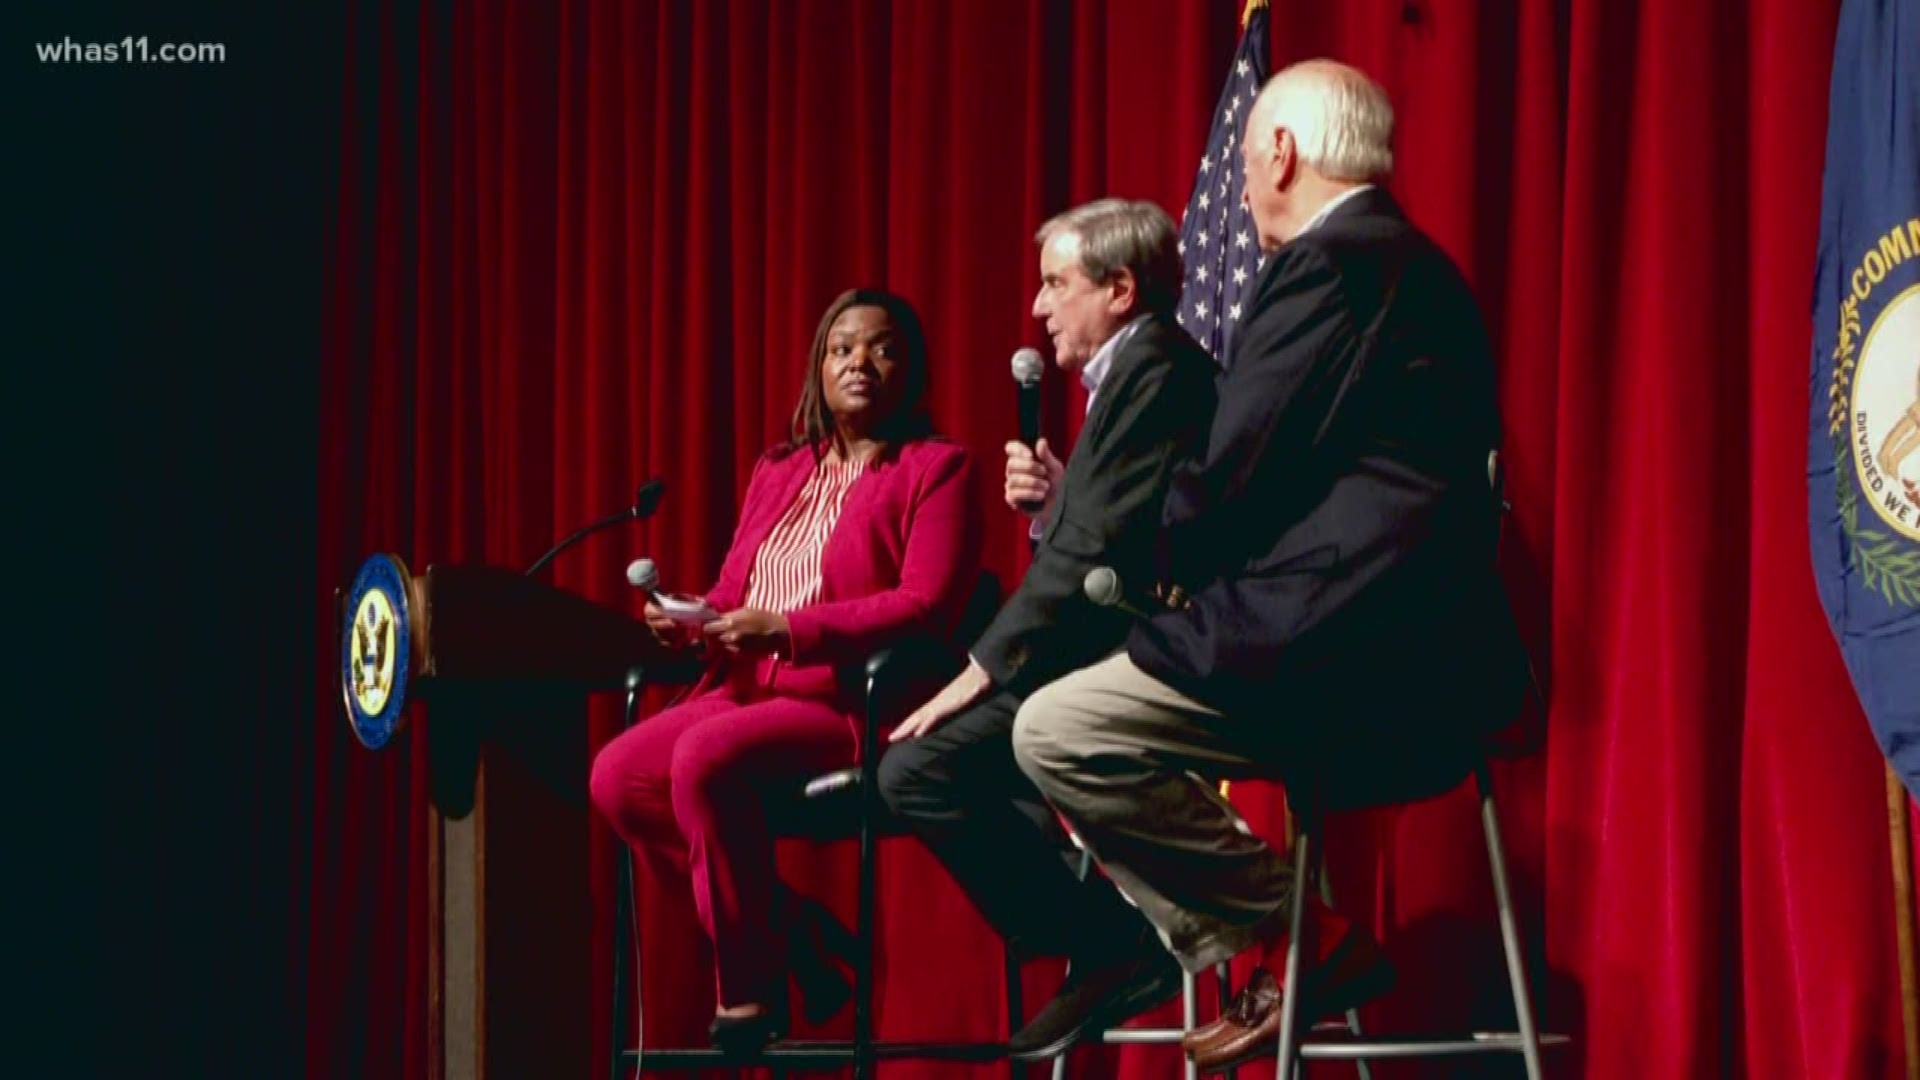 Congressional leaders are pushing for gun reform legislation, through a town hall hosted at Atherton High School Thursday night.